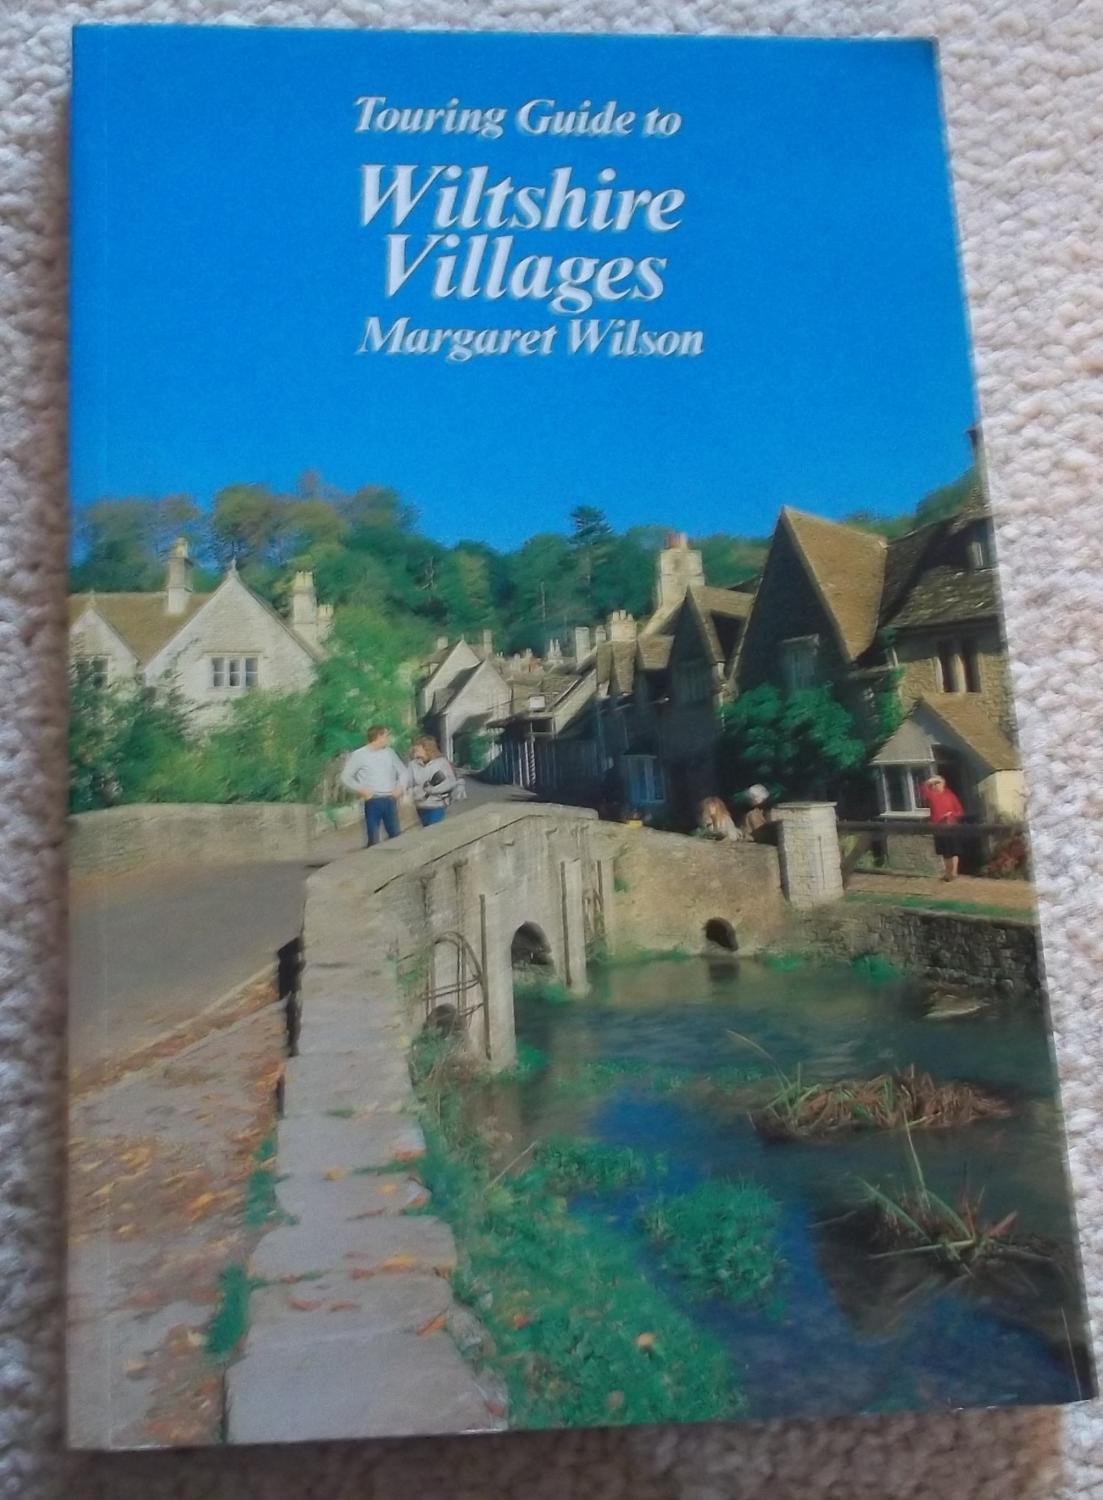 Touring Guide to Wiltshire Villages - Margaret Wilson